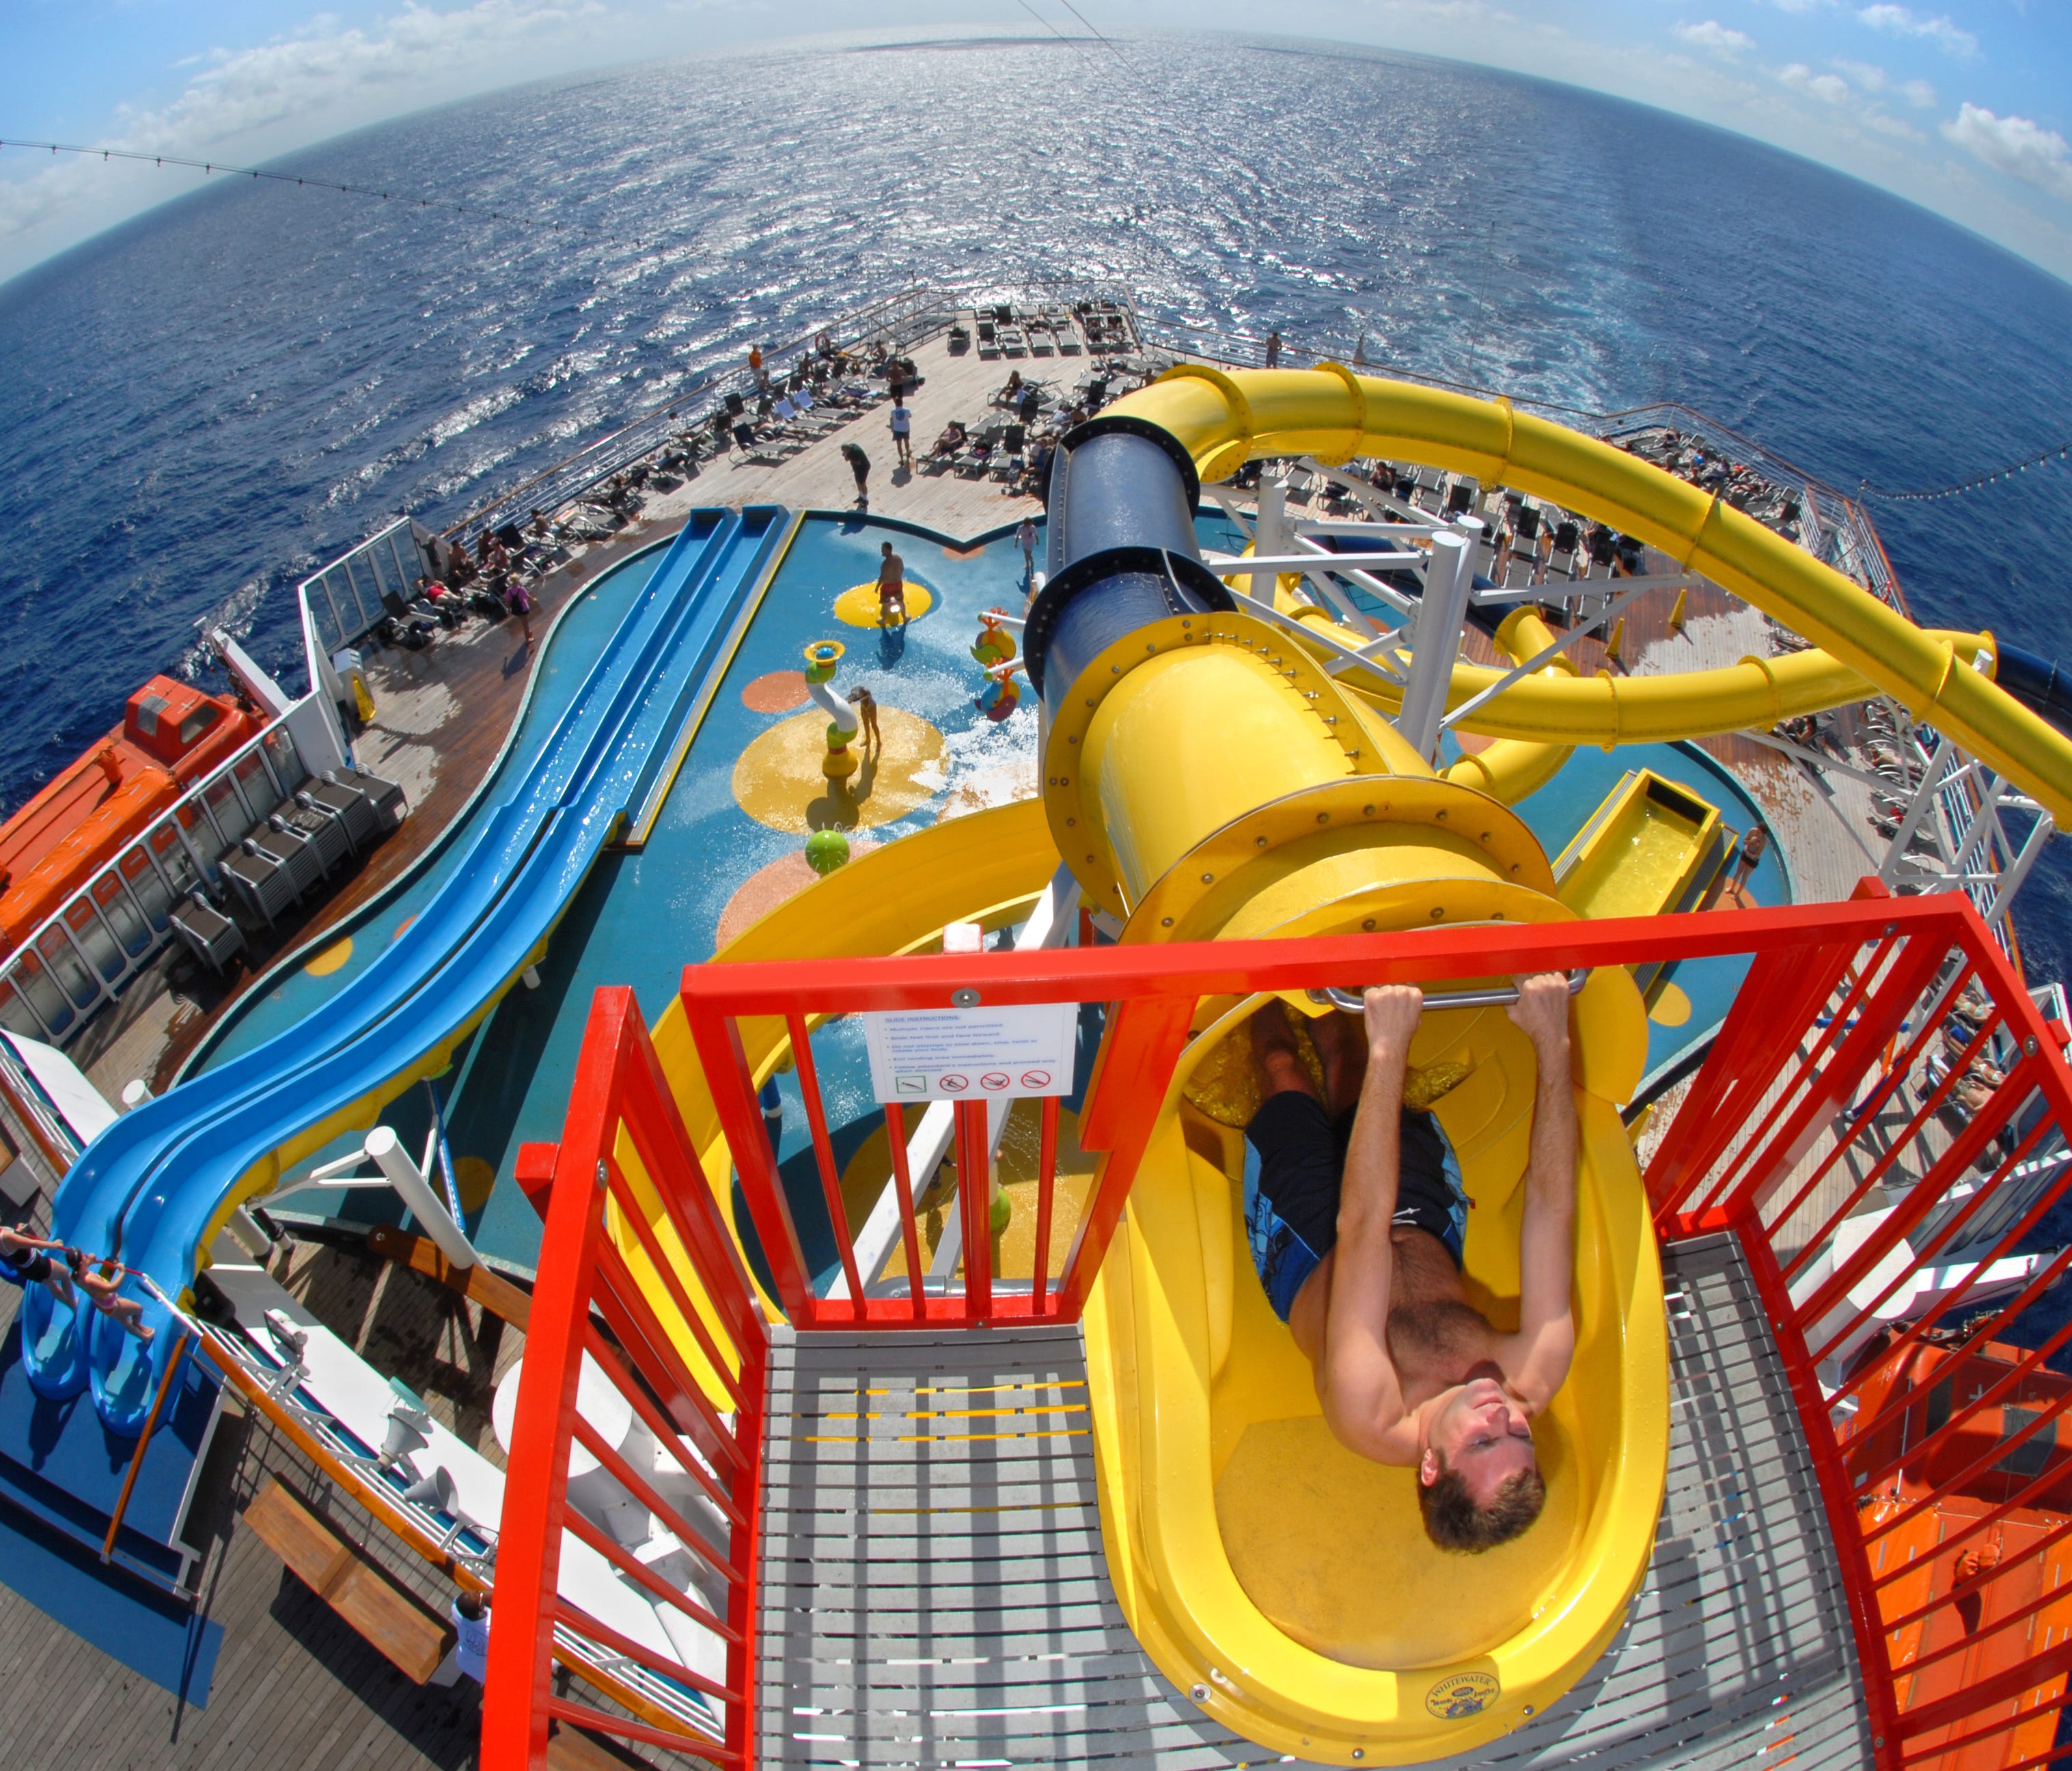 Carnival Cruise Line's Carnival Inspiration features a deck-top water park with a 300-foot-long slide.